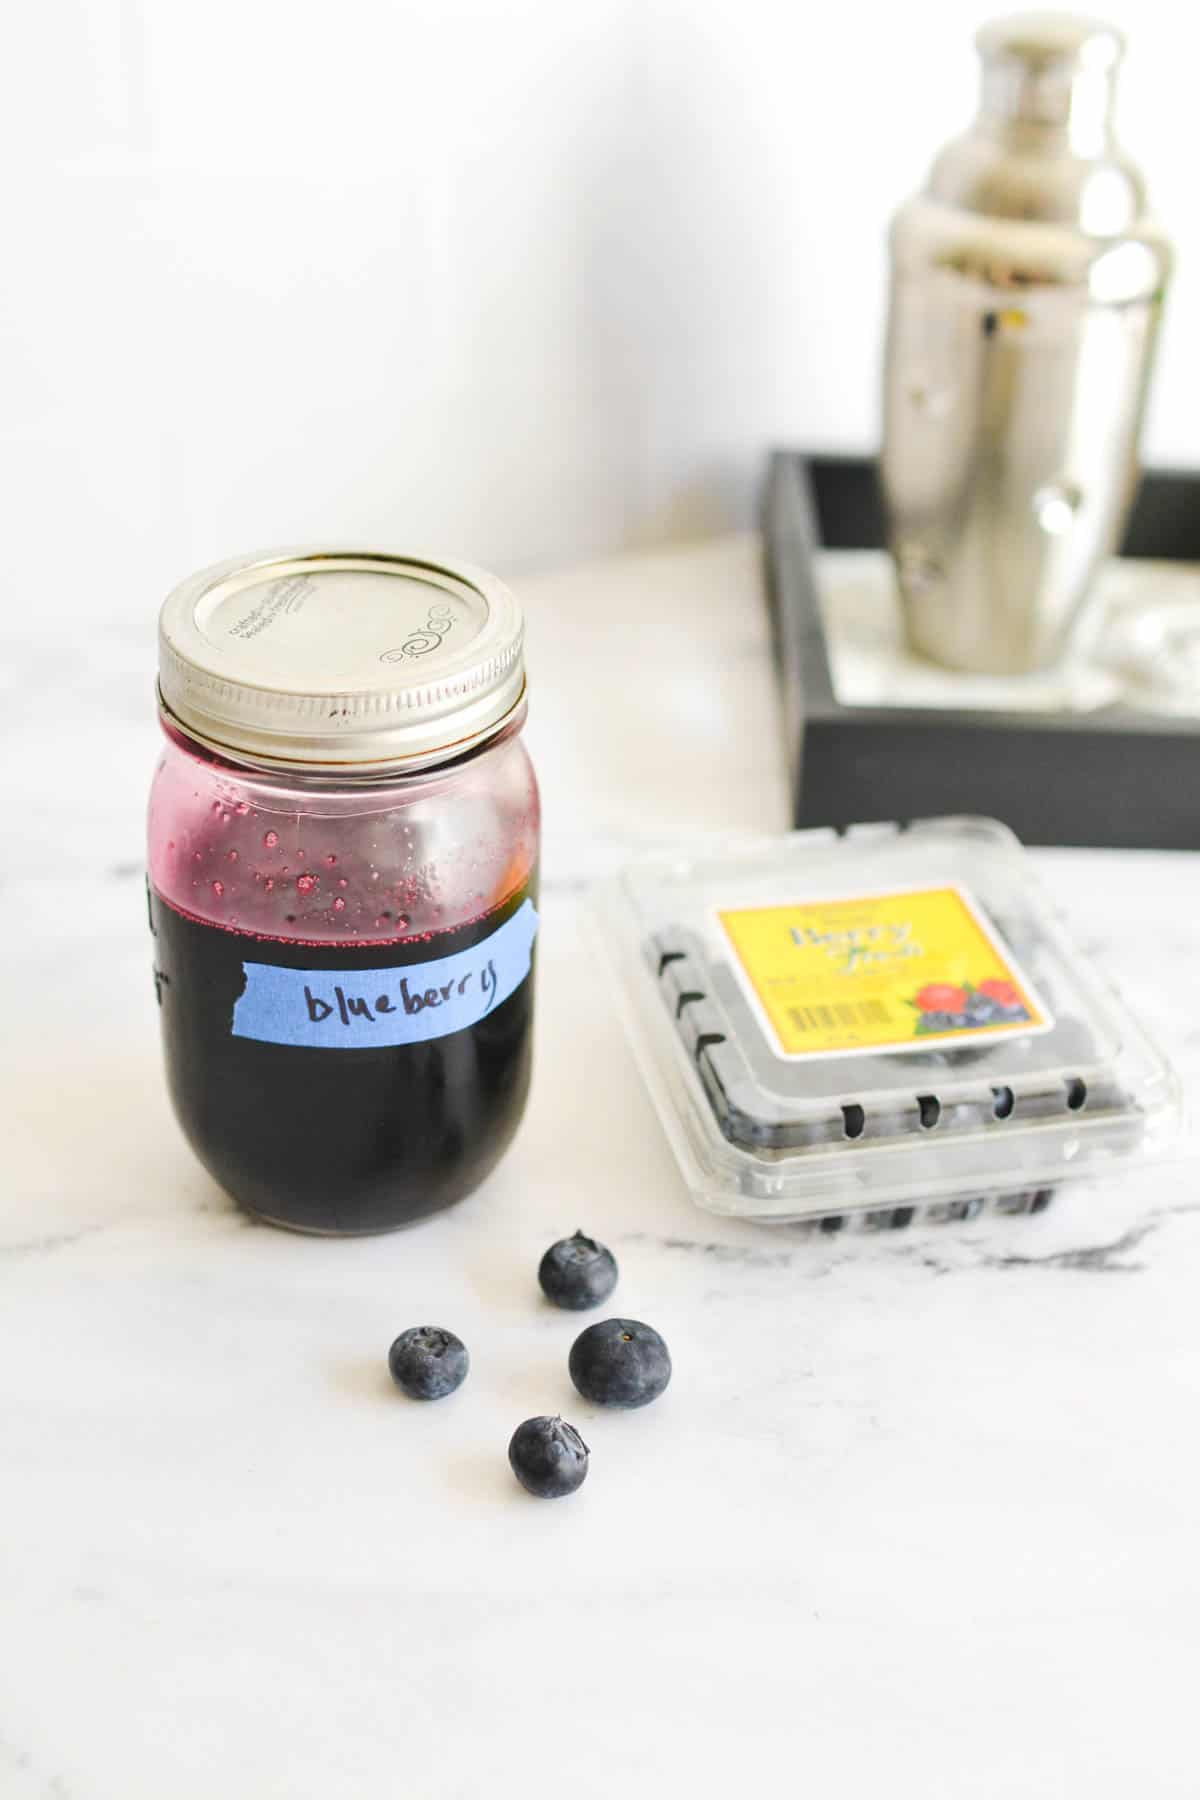 Blueberry Simple Syrup in a jar labeled with a piece of tape next to a container of bluberries. 